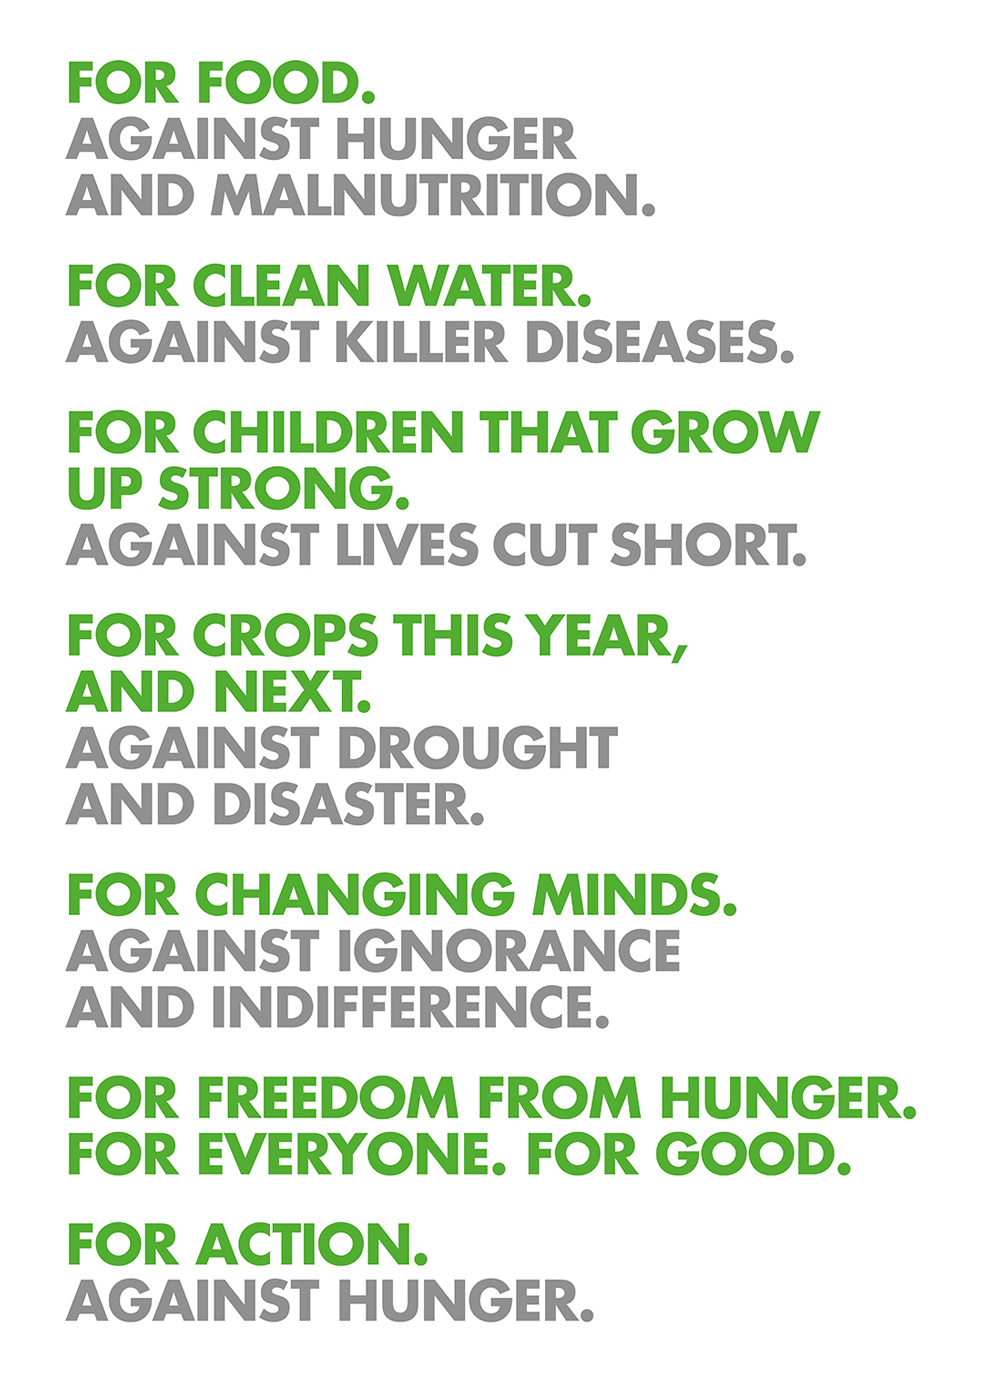 New Logo and Identity for Action Against Hunger by johnson banks